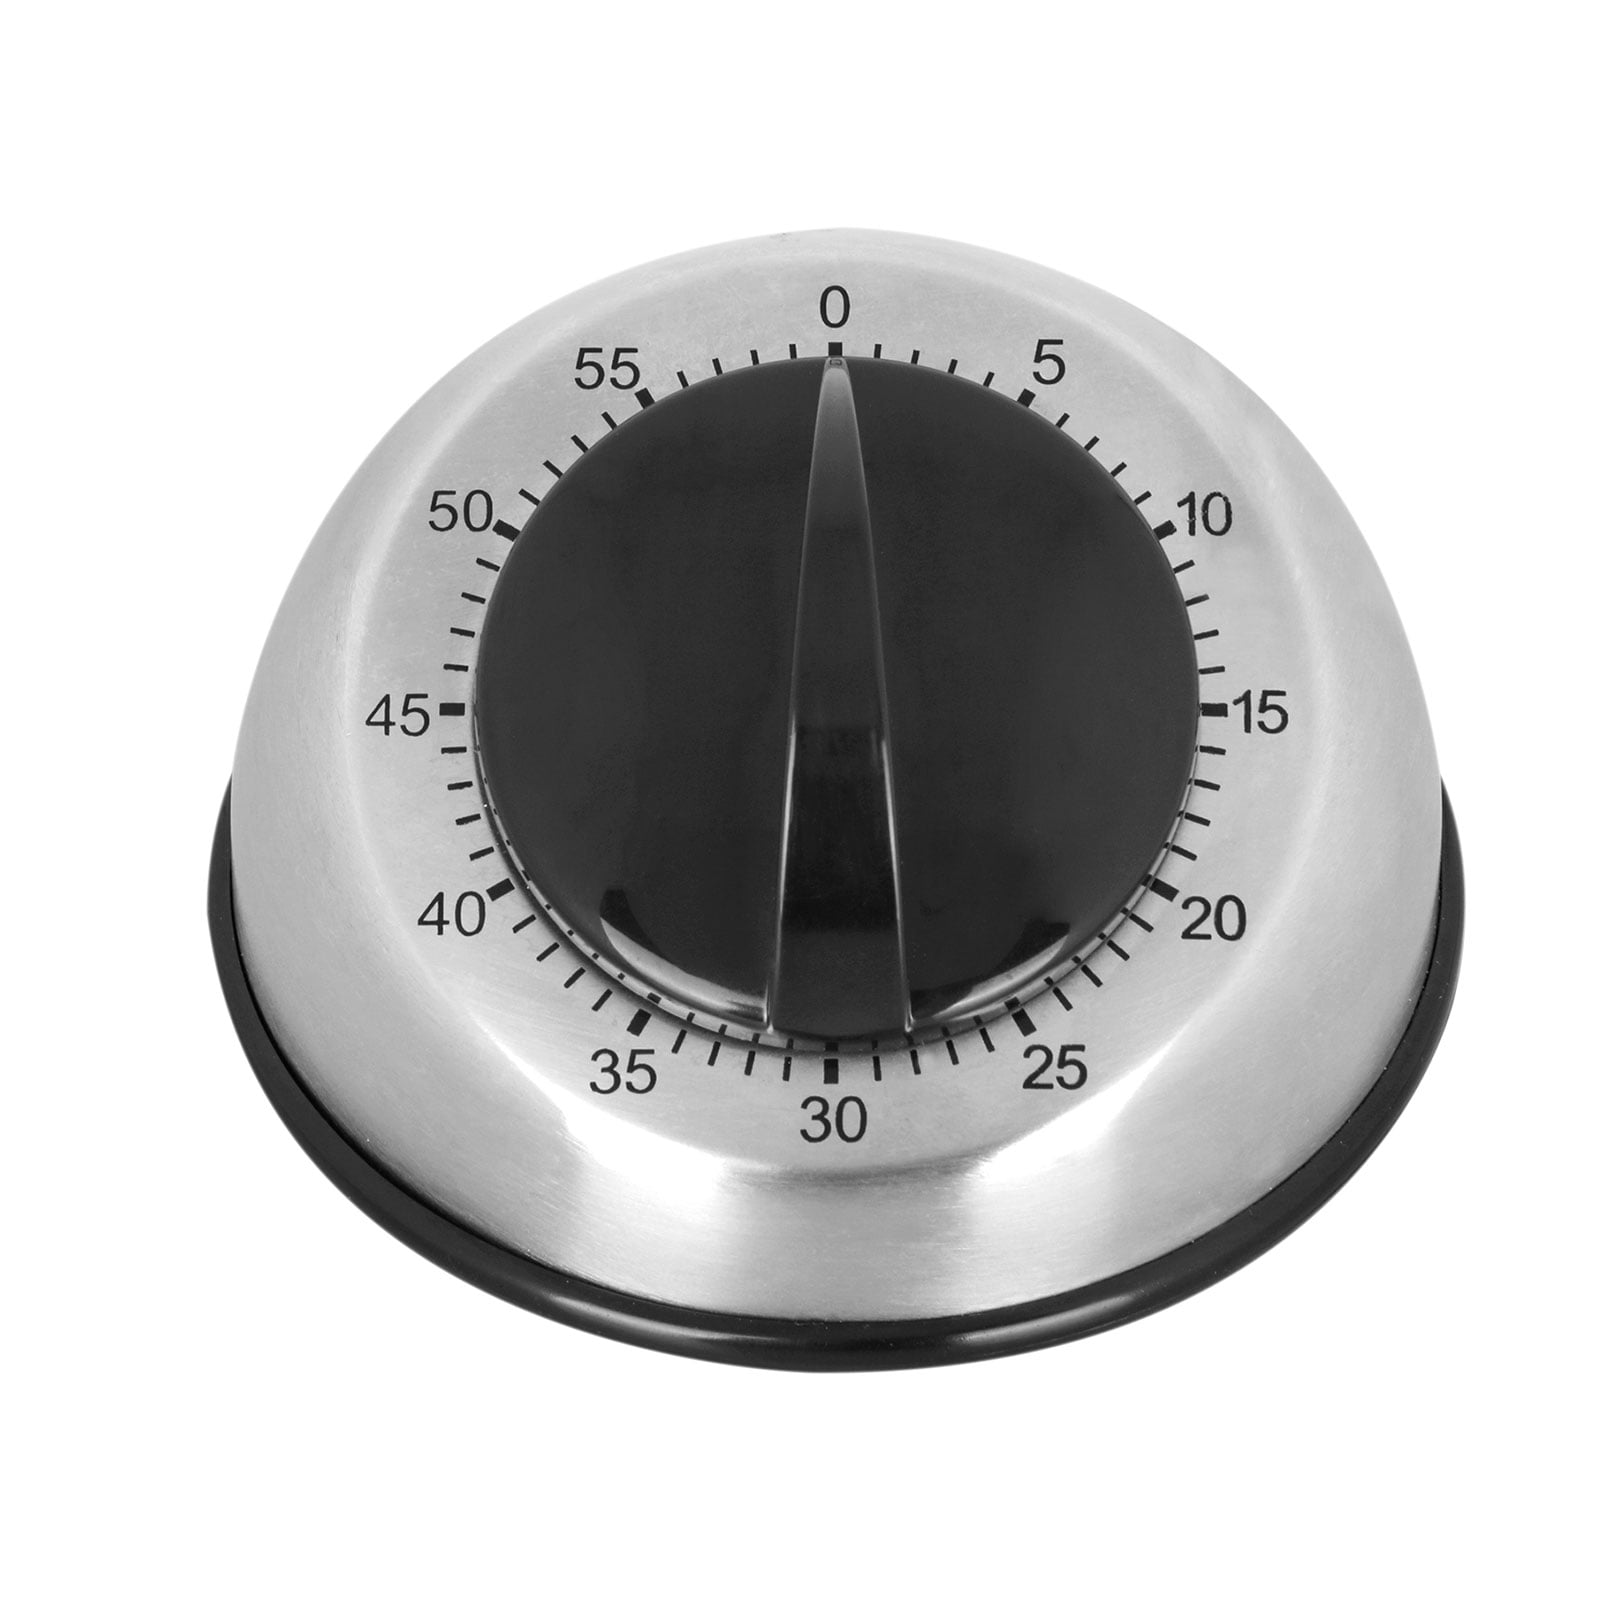 Details about   Baldr Mechanical Kitchen Cooking Timer Magnetic Long Ring Loud Alarm 60 Minutes 